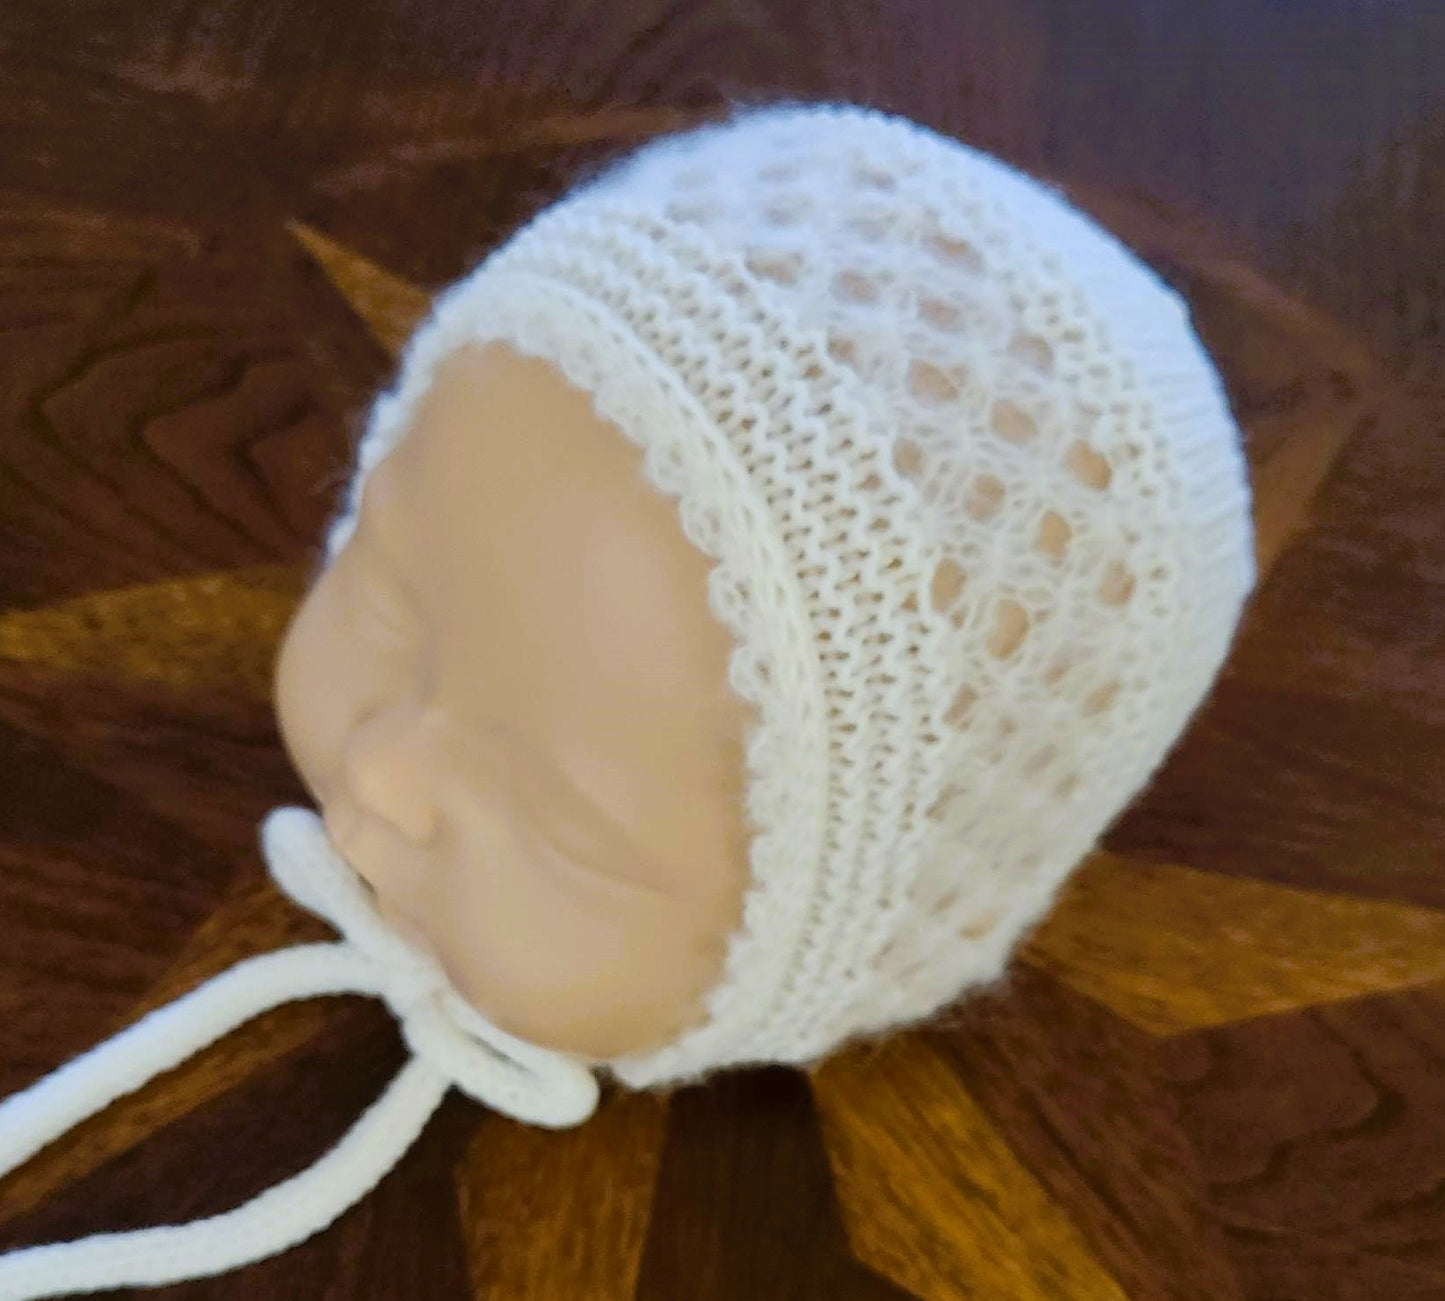 Newborn Sara Bonnet(some colours have option to add on Ballet Slippers)